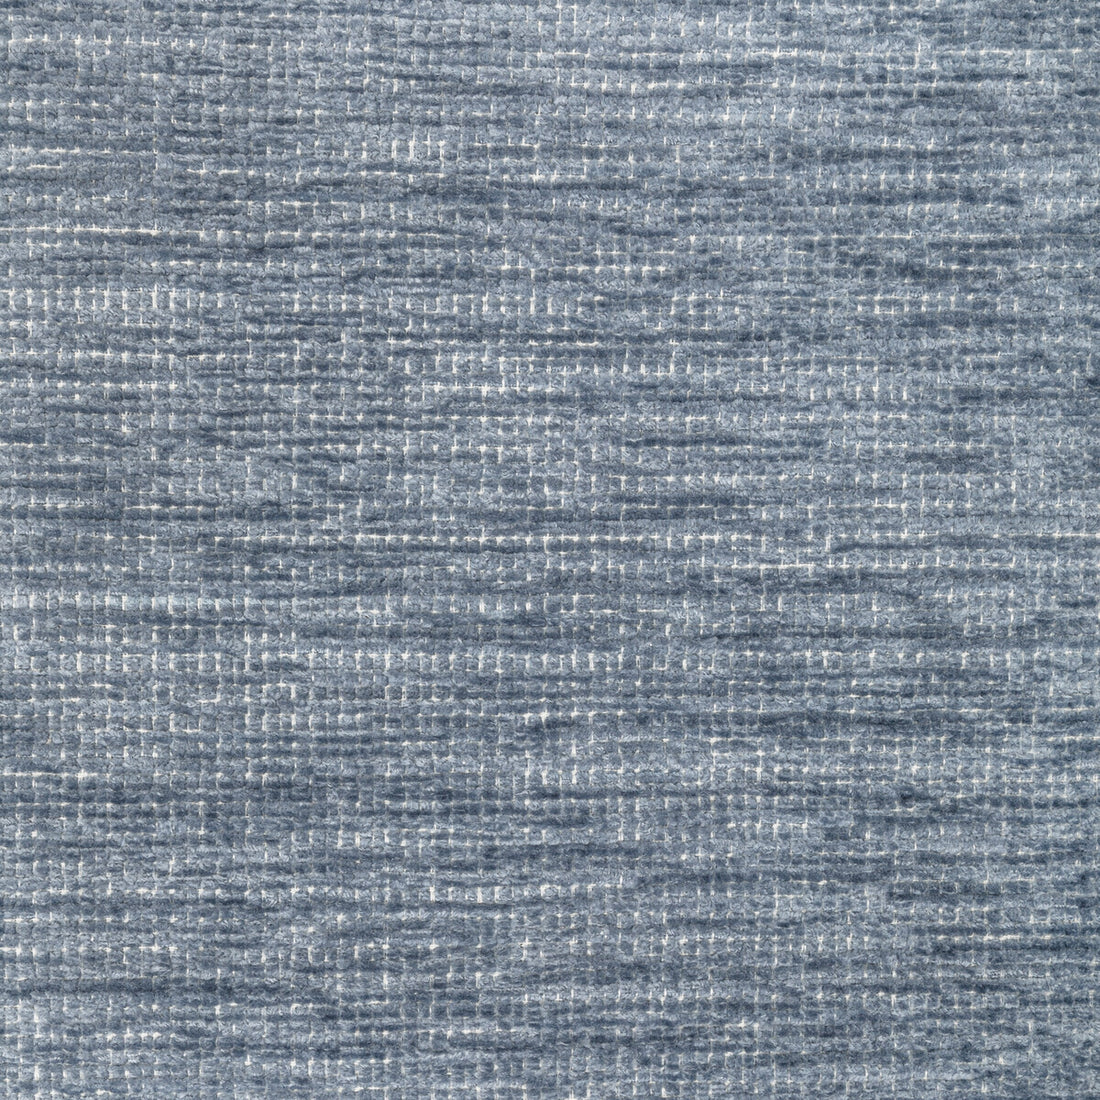 Lemenc Texture fabric in blue color - pattern 8022124.5.0 - by Brunschwig &amp; Fils in the Chambery Textures III collection